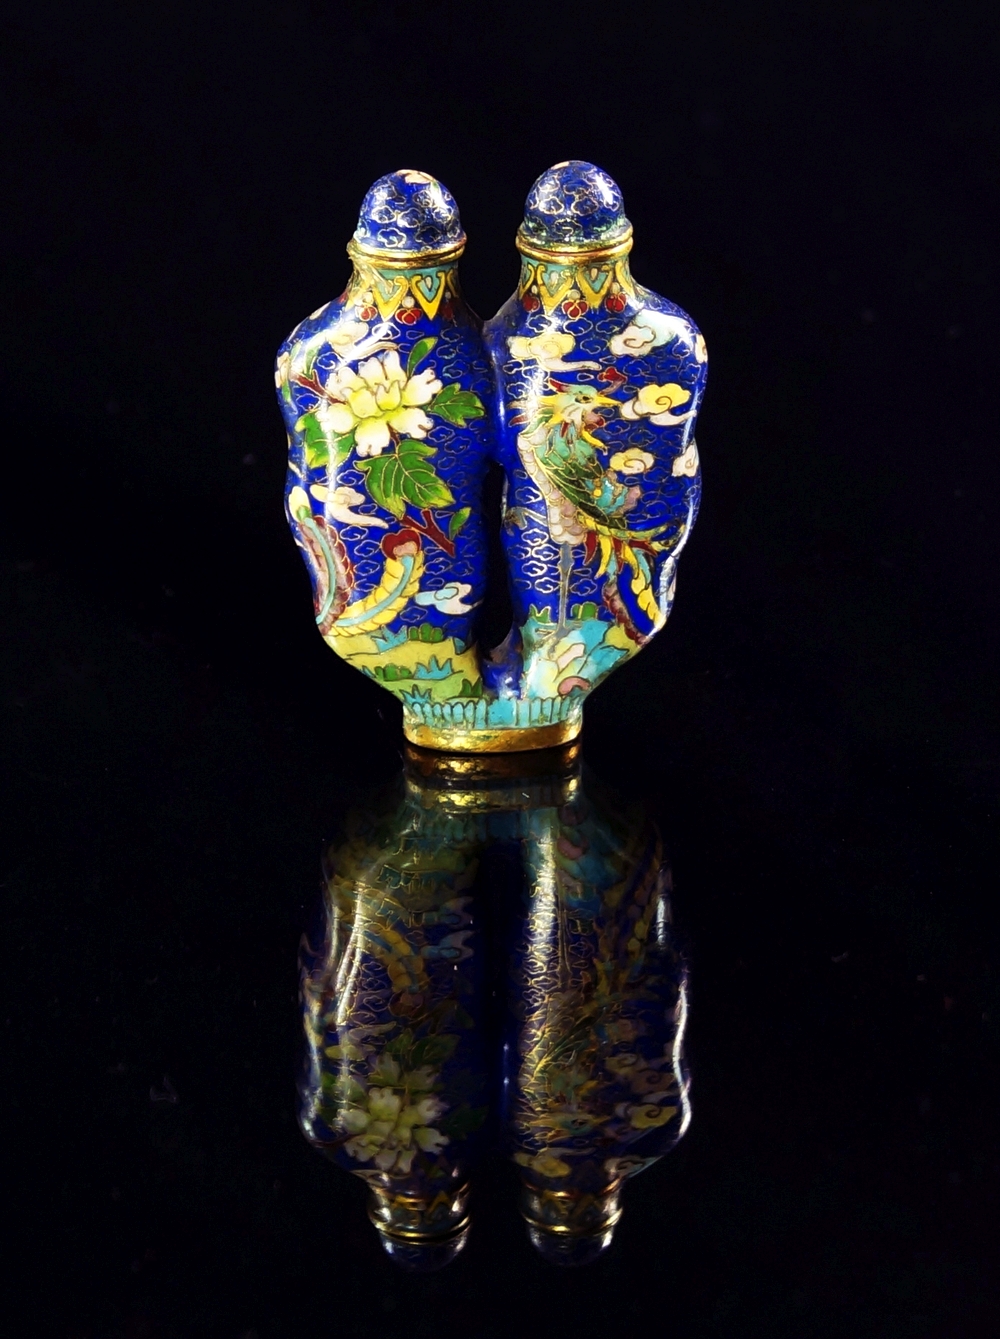 A Chinese cloisonne enamel double snuff bottle, 19th/20th century, with two lids with interior